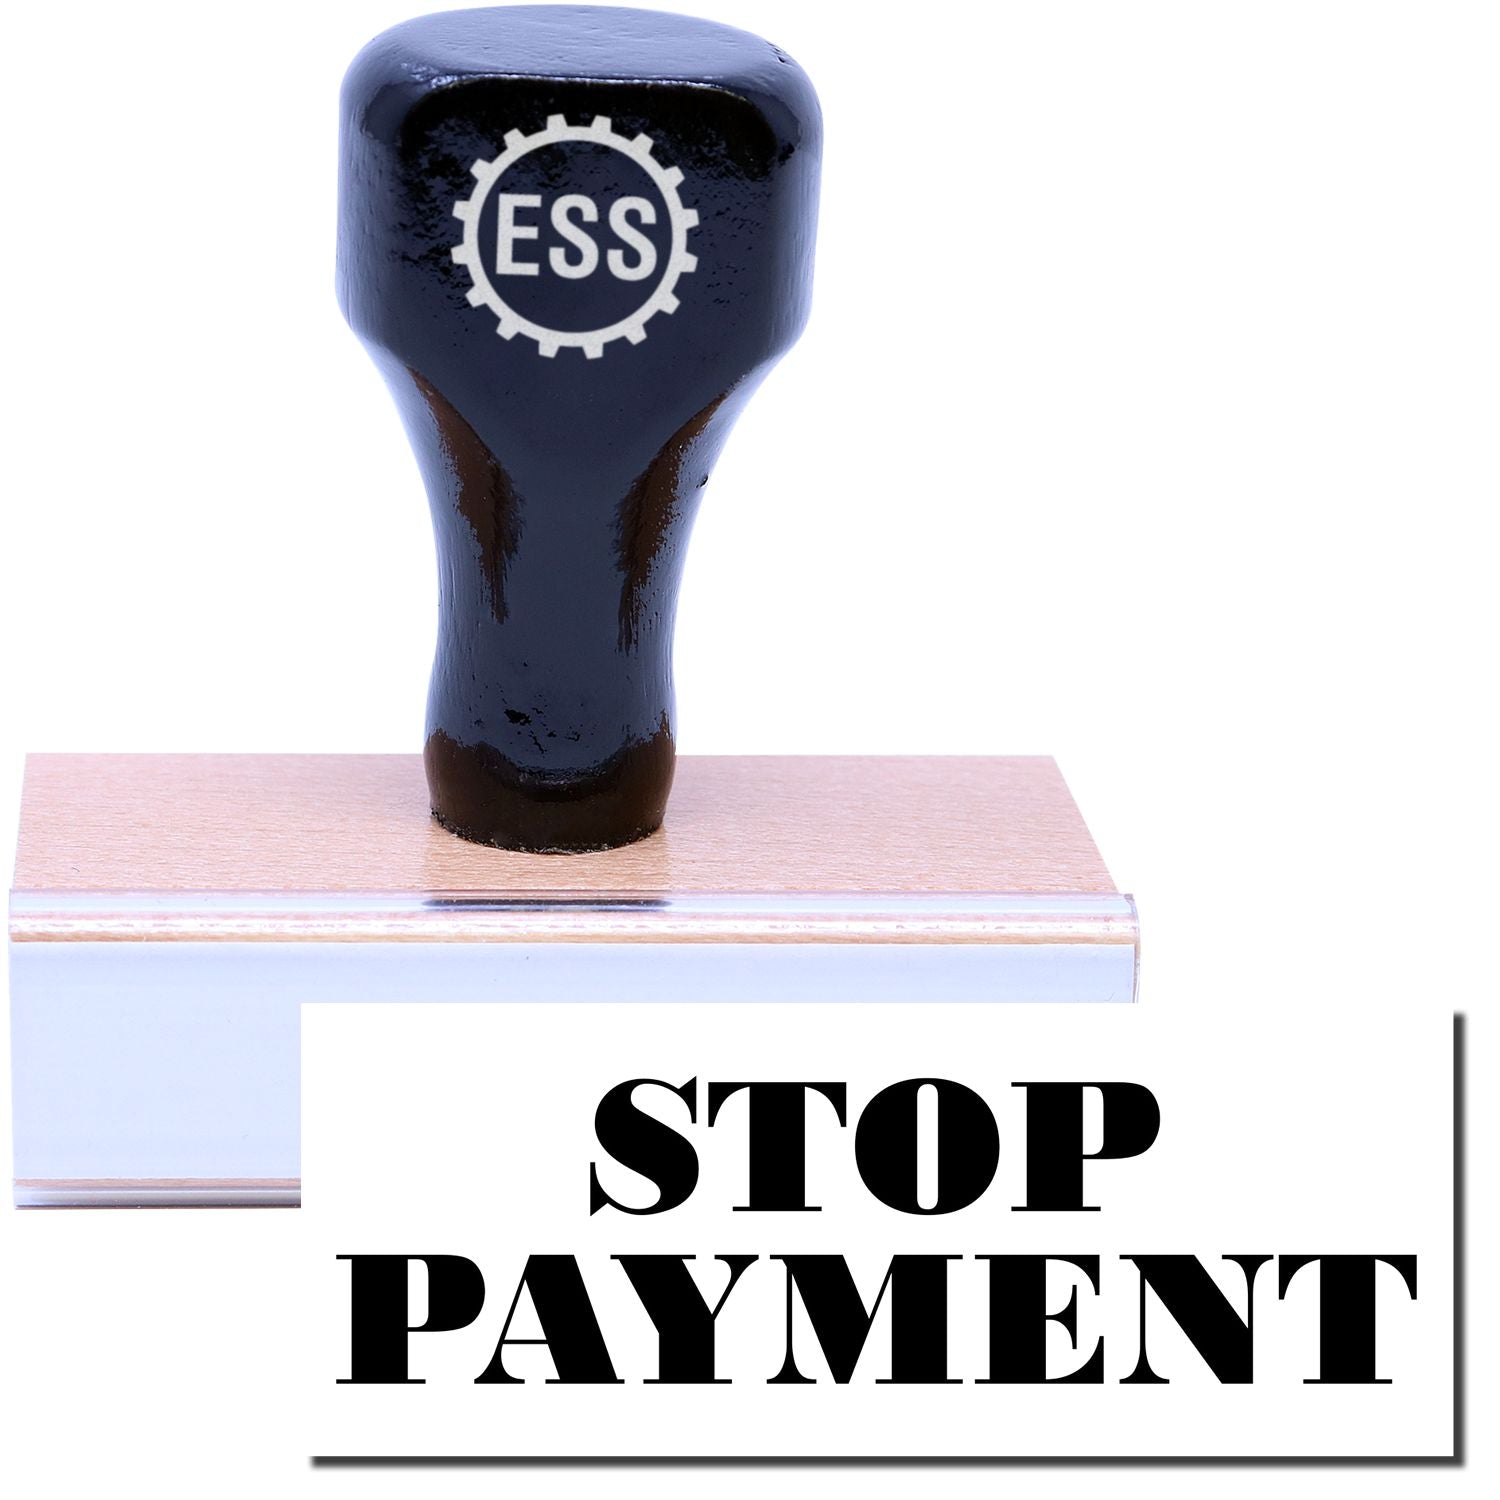 A stock office rubber stamp with a stamped image showing how the text "STOP PAYMENT" in a large font is displayed after stamping.